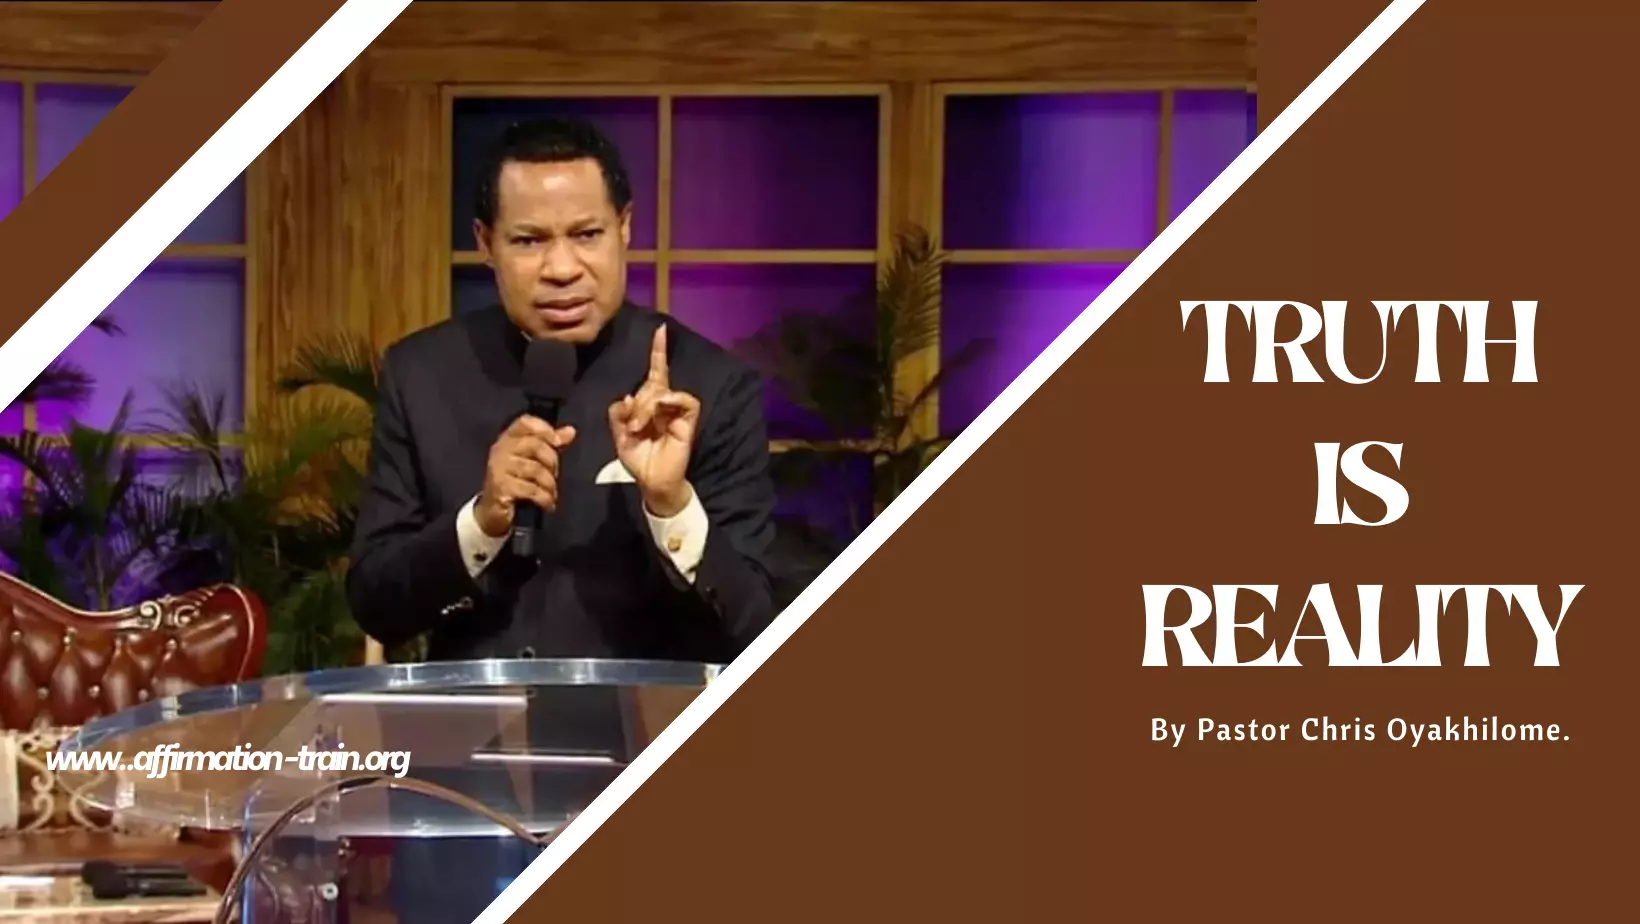 TRUTH IS REALITY PASTOR CHRIS